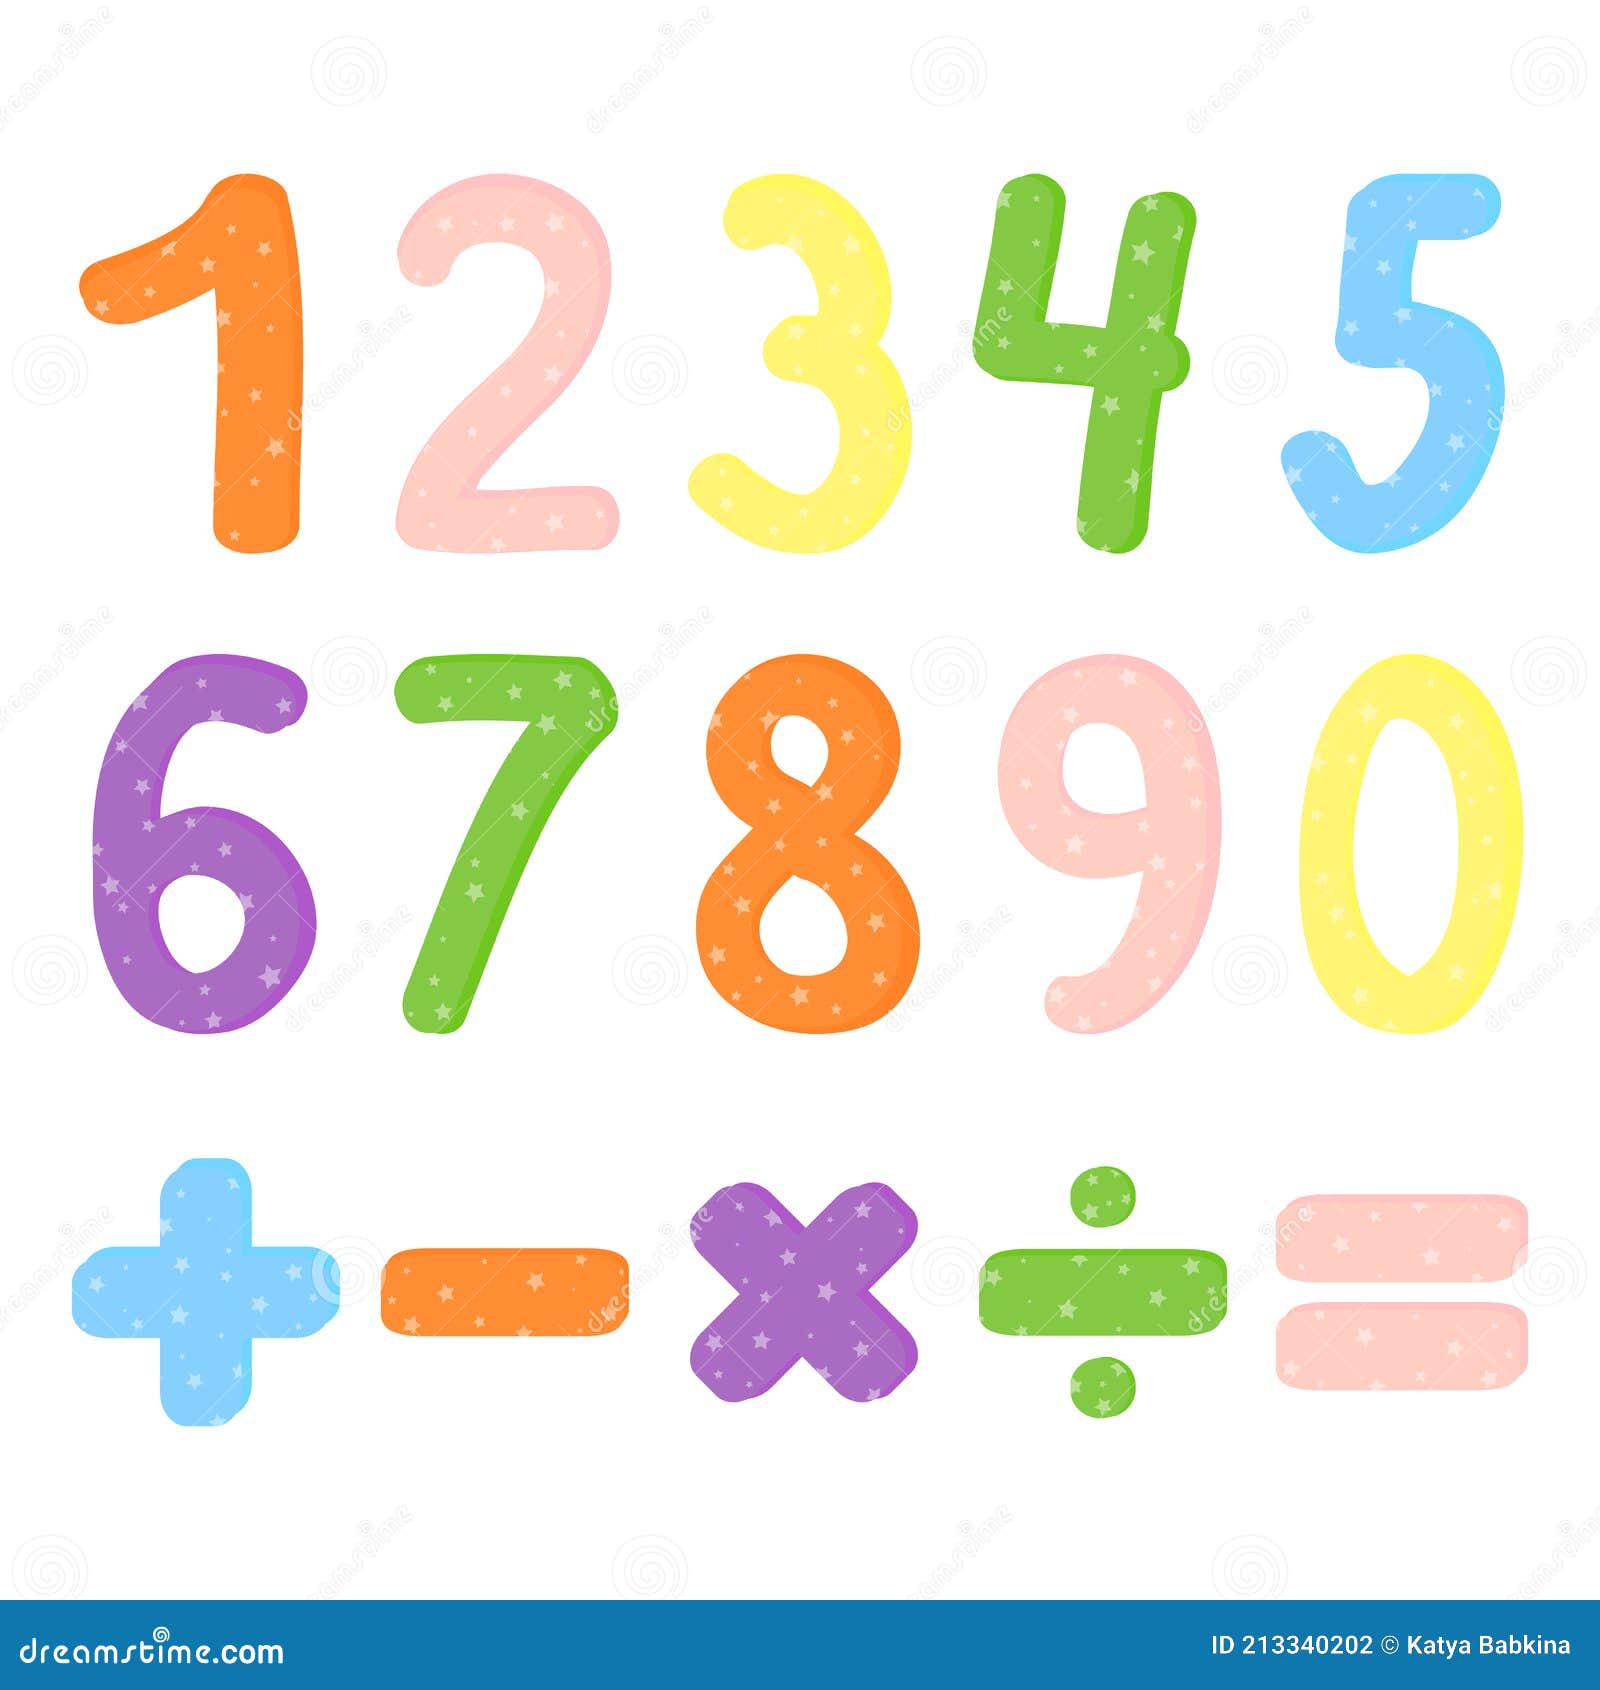 Numbers from zero to nine stock vector. Illustration of math